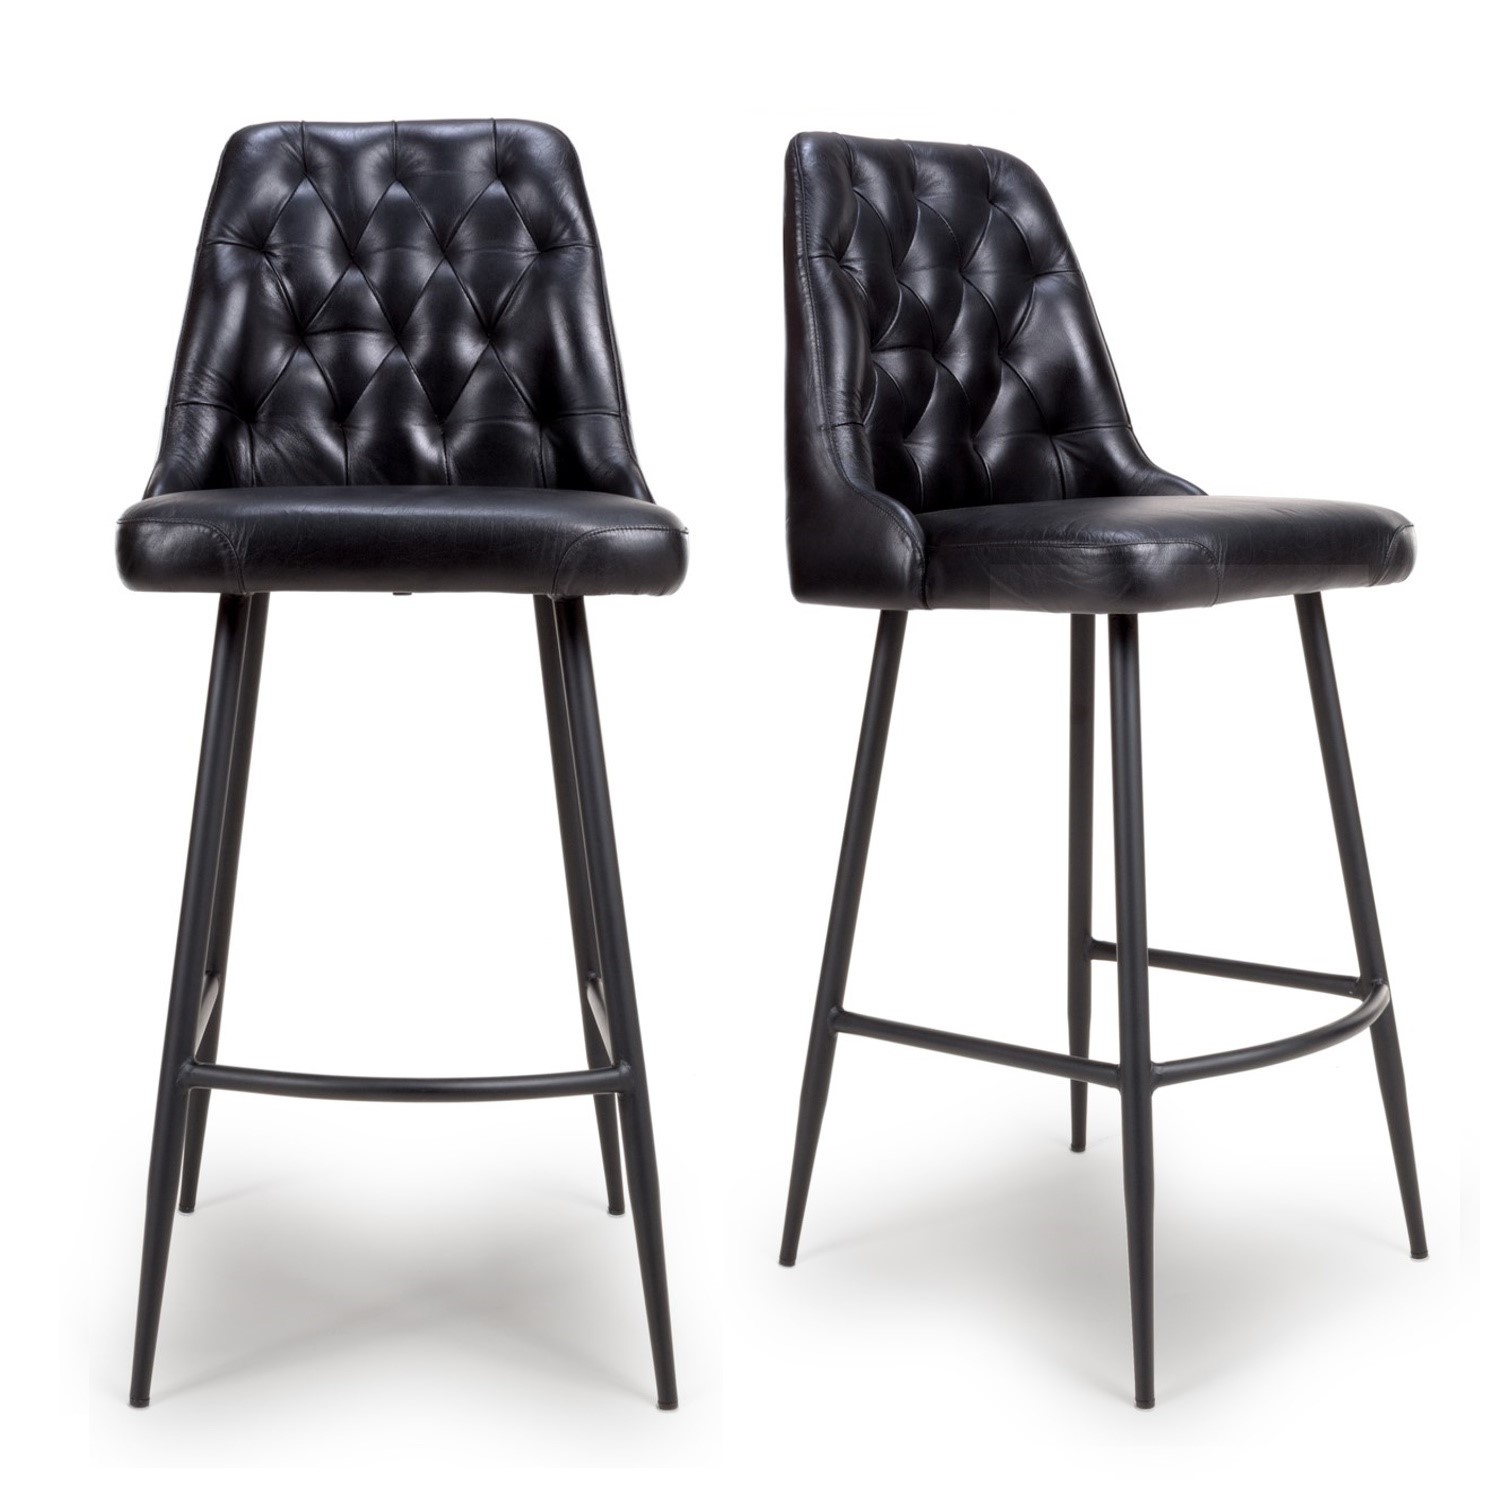 Photo of Set of 2 real leather black kitchen stools with quilted back - jaxson